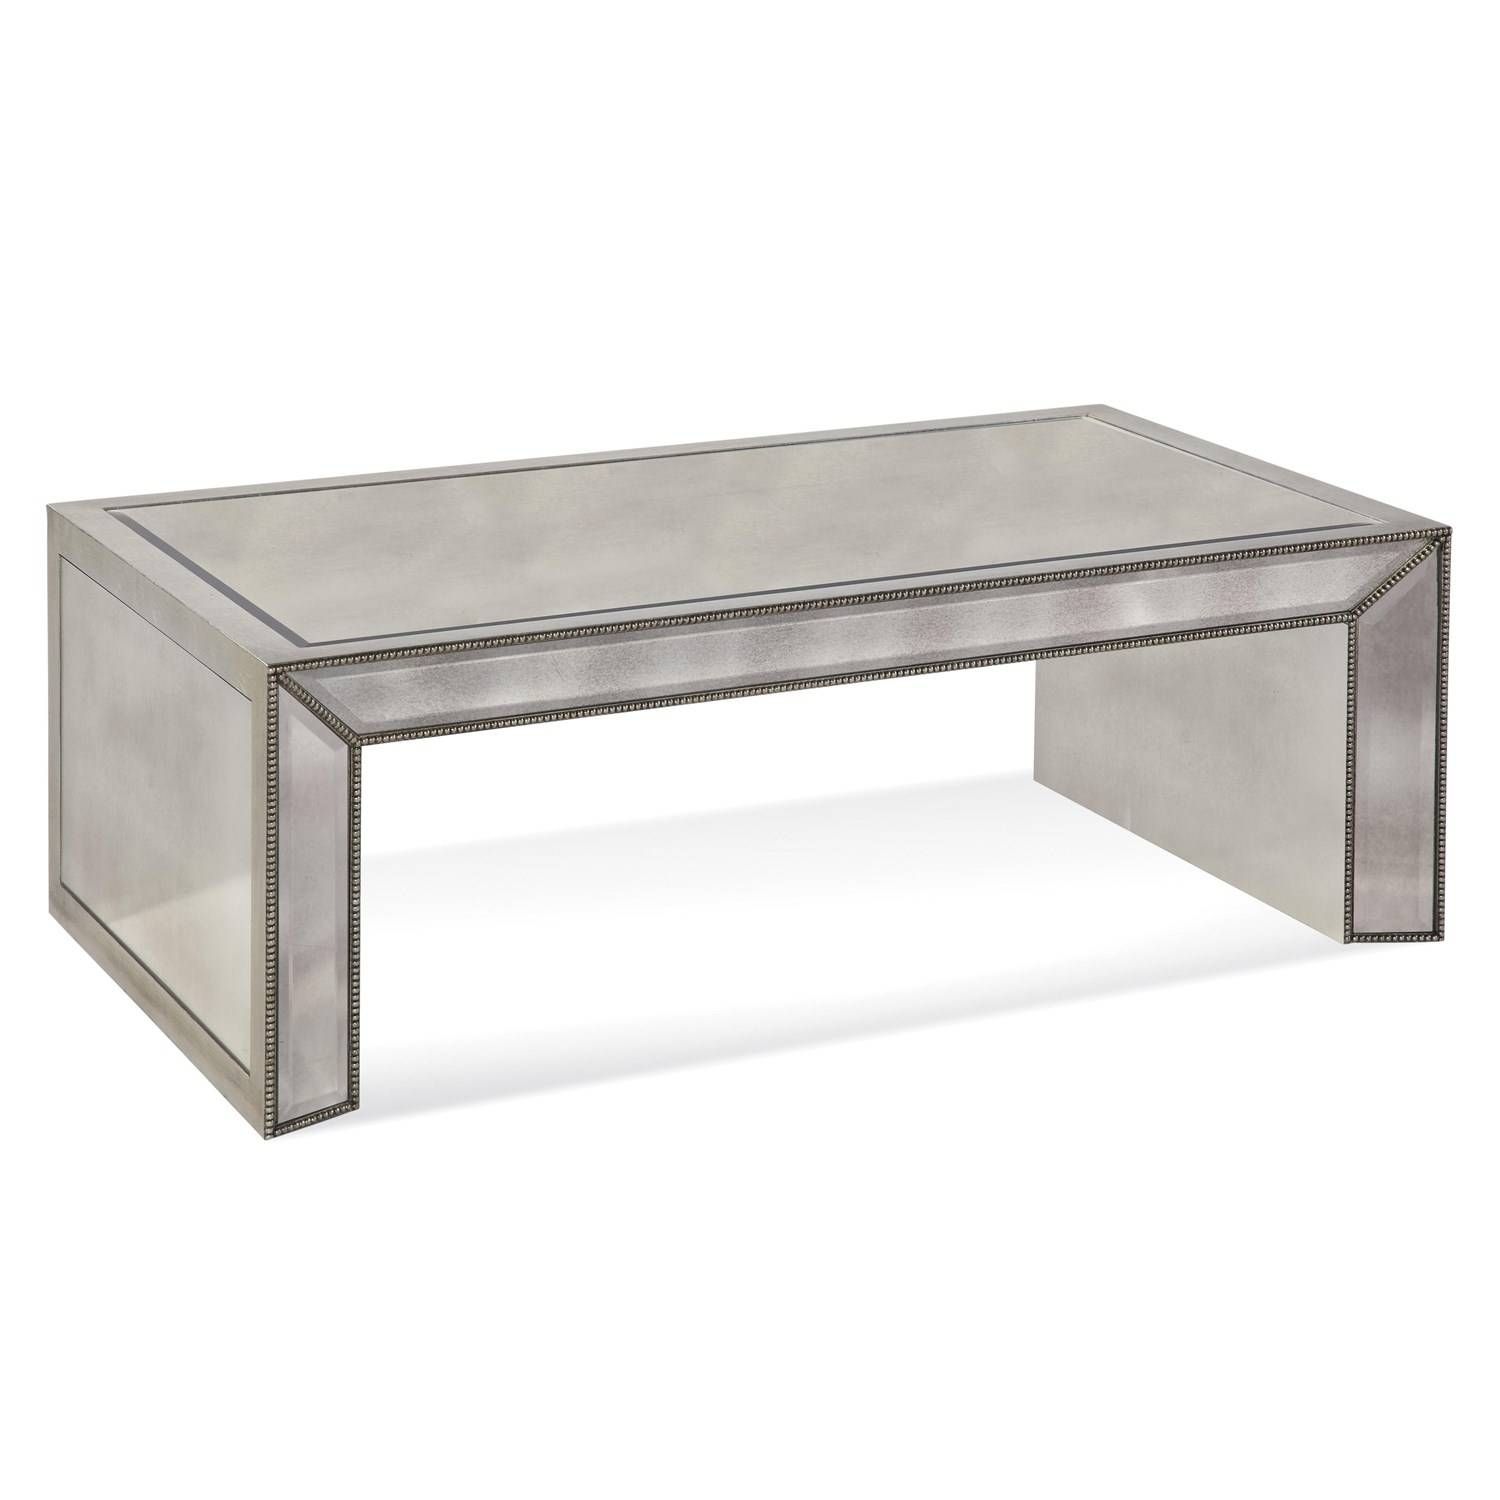 Bassett Mirror Coffee Tables | Homeclick Inside Antique Mirrored Coffee Tables (View 13 of 30)